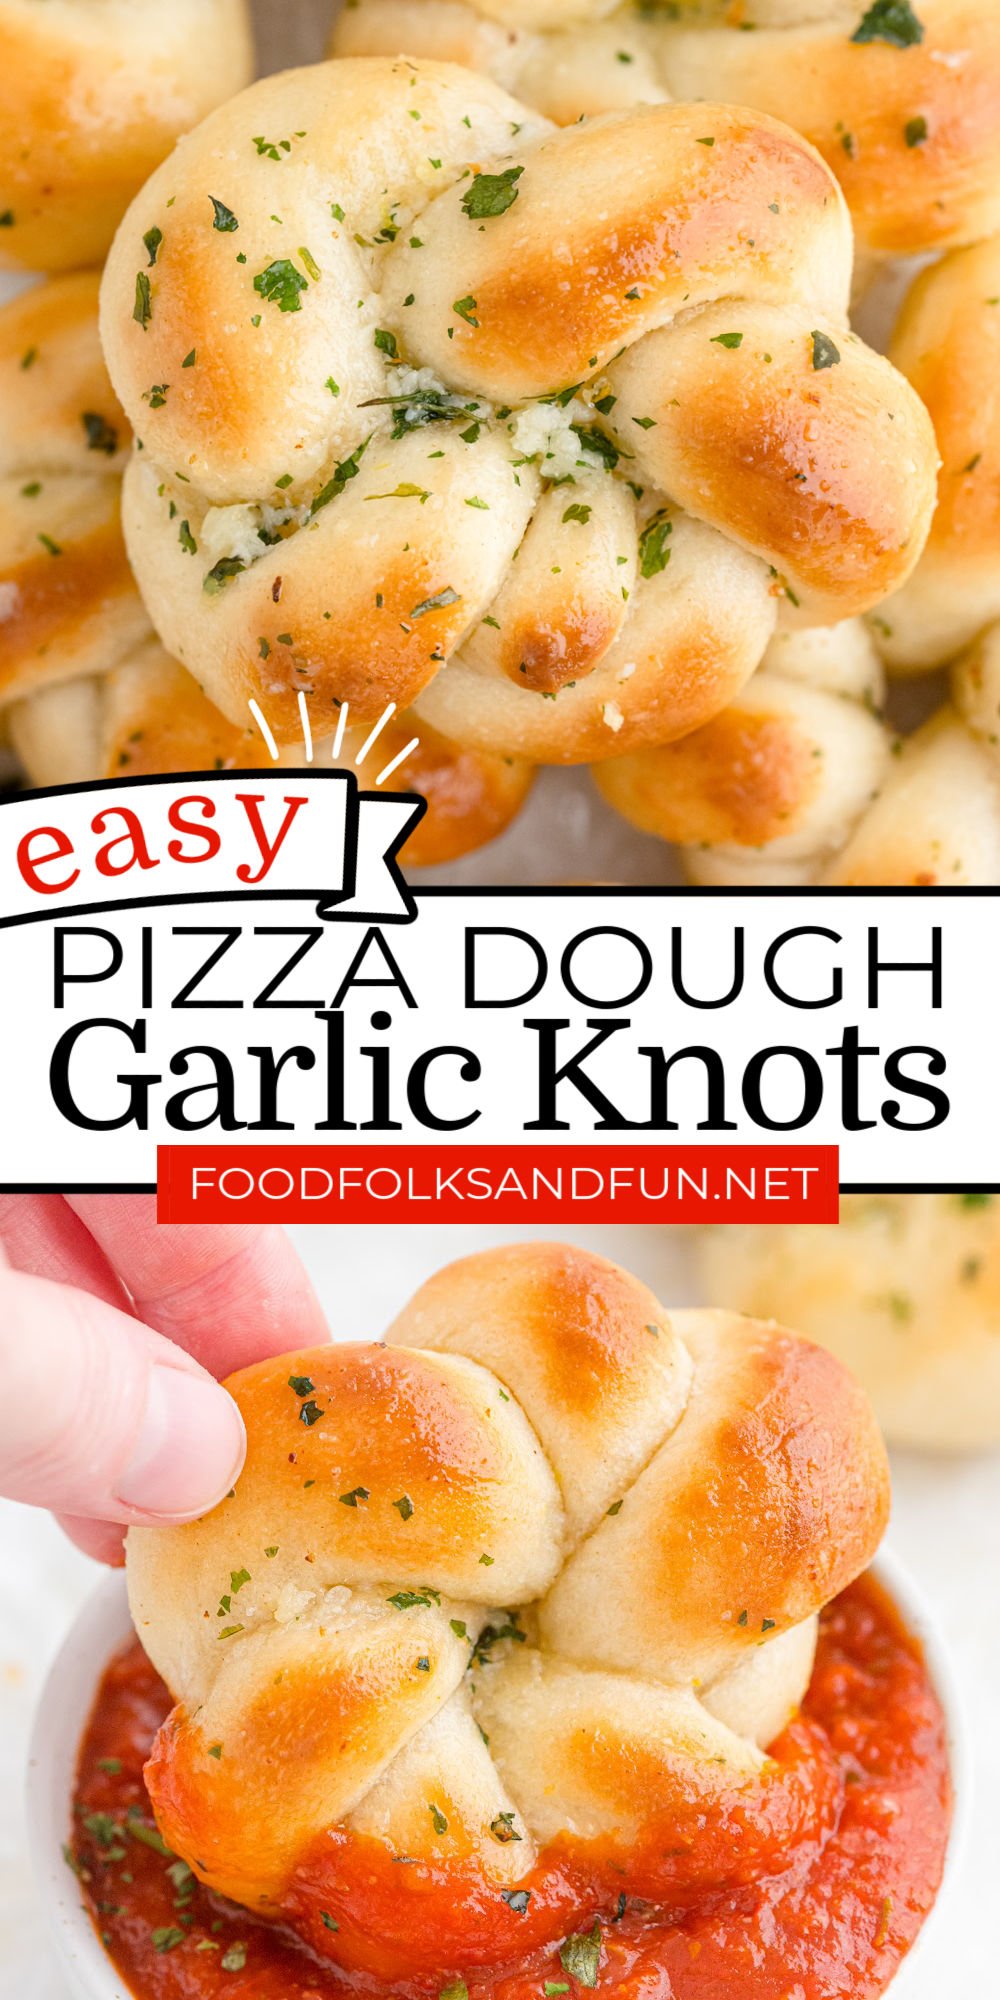 These Pizza Dough Garlic Knots are soft, buttery, and taste like they came from a pizzeria! They’re heavenly right out of the oven. via @foodfolksandfun